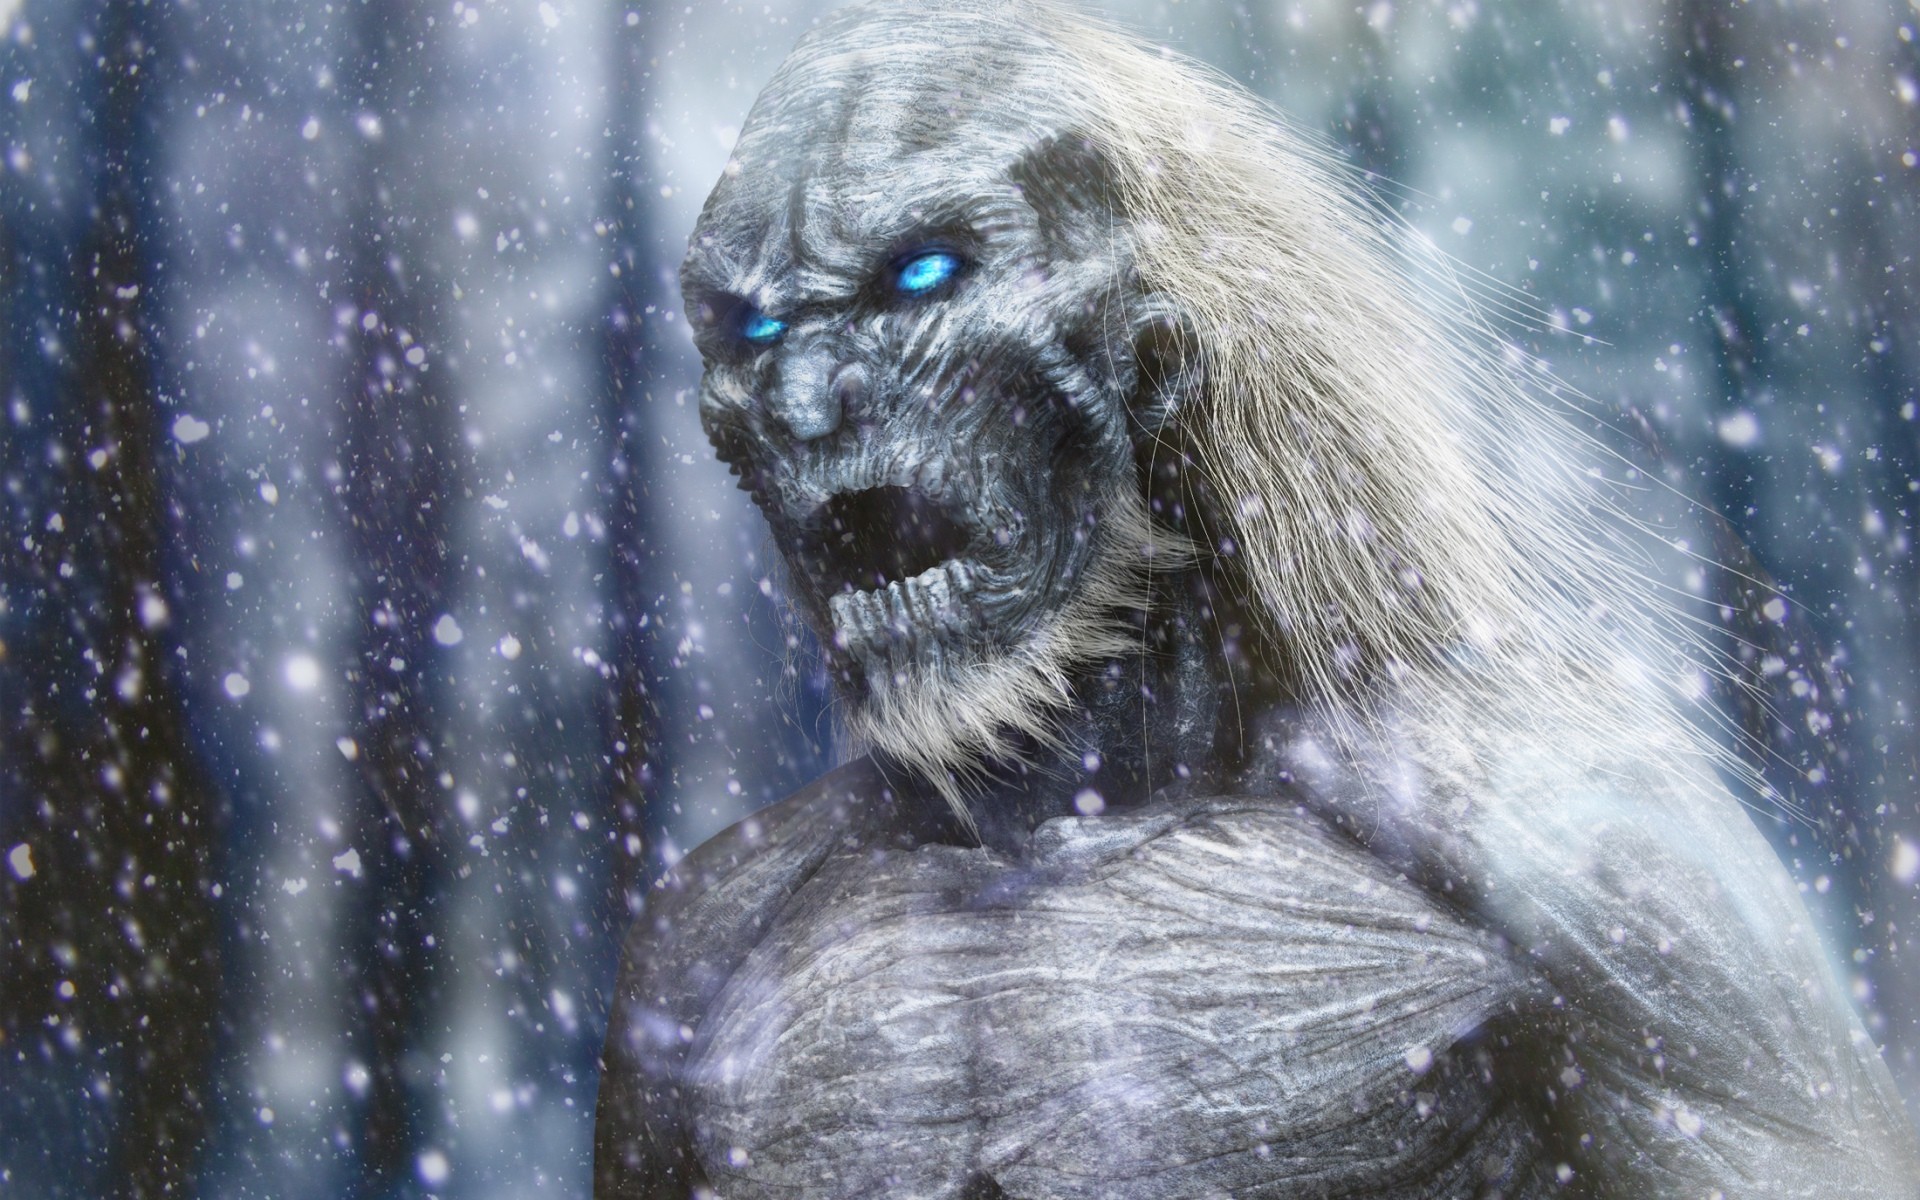 game, Of, Thrones, Song, Of, Ice, And, Fire, White, Walker, Snow, Face